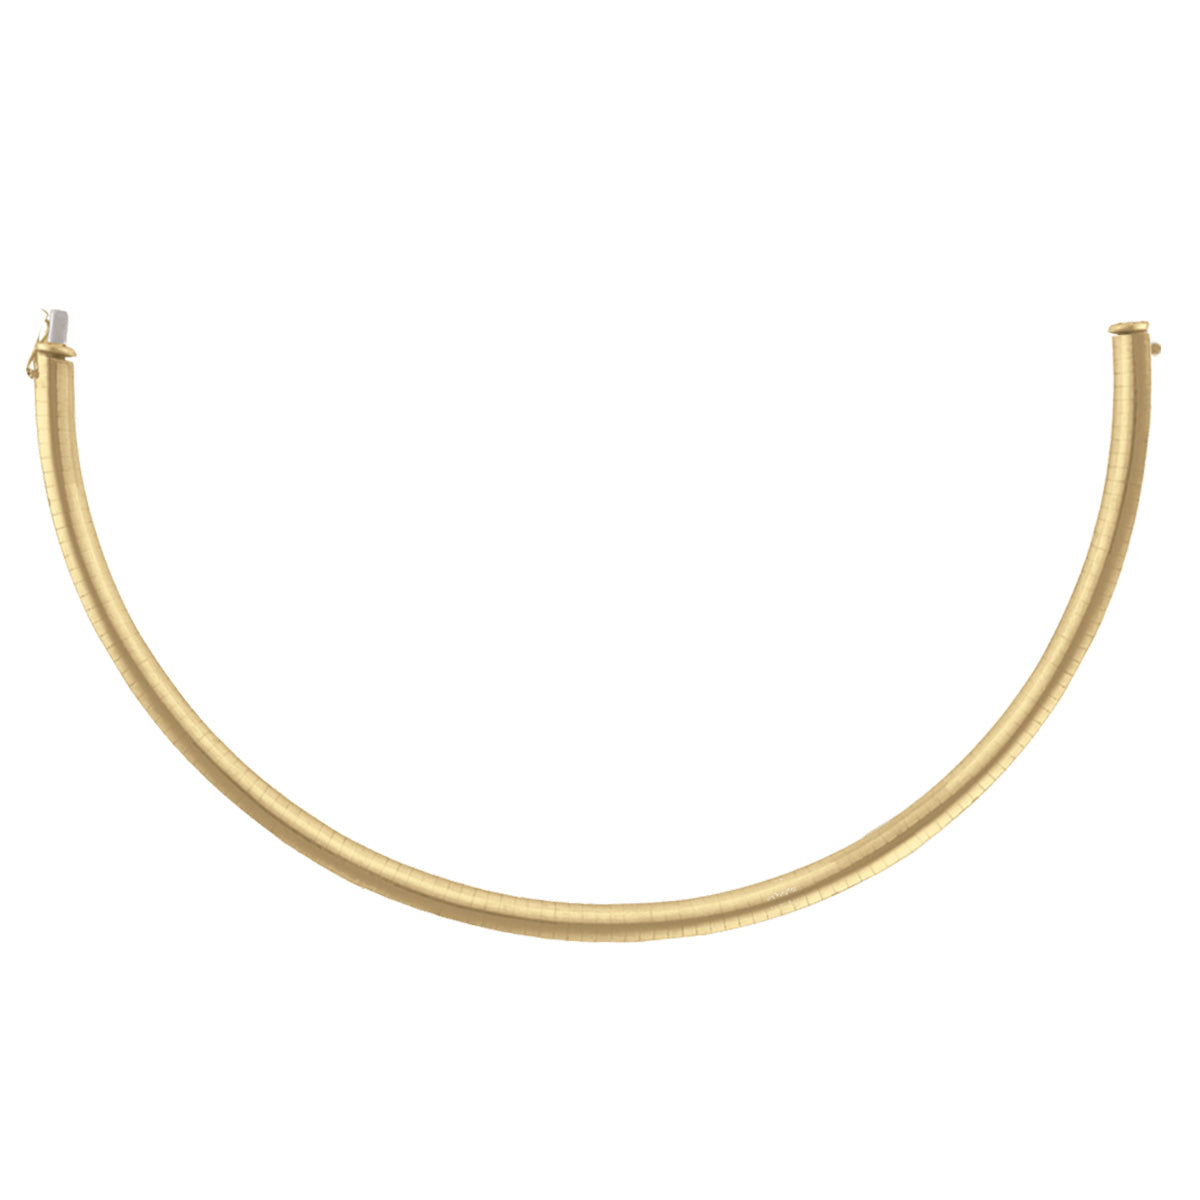 COMG01, Gold Domed Omega Necklace, Yellow Gold